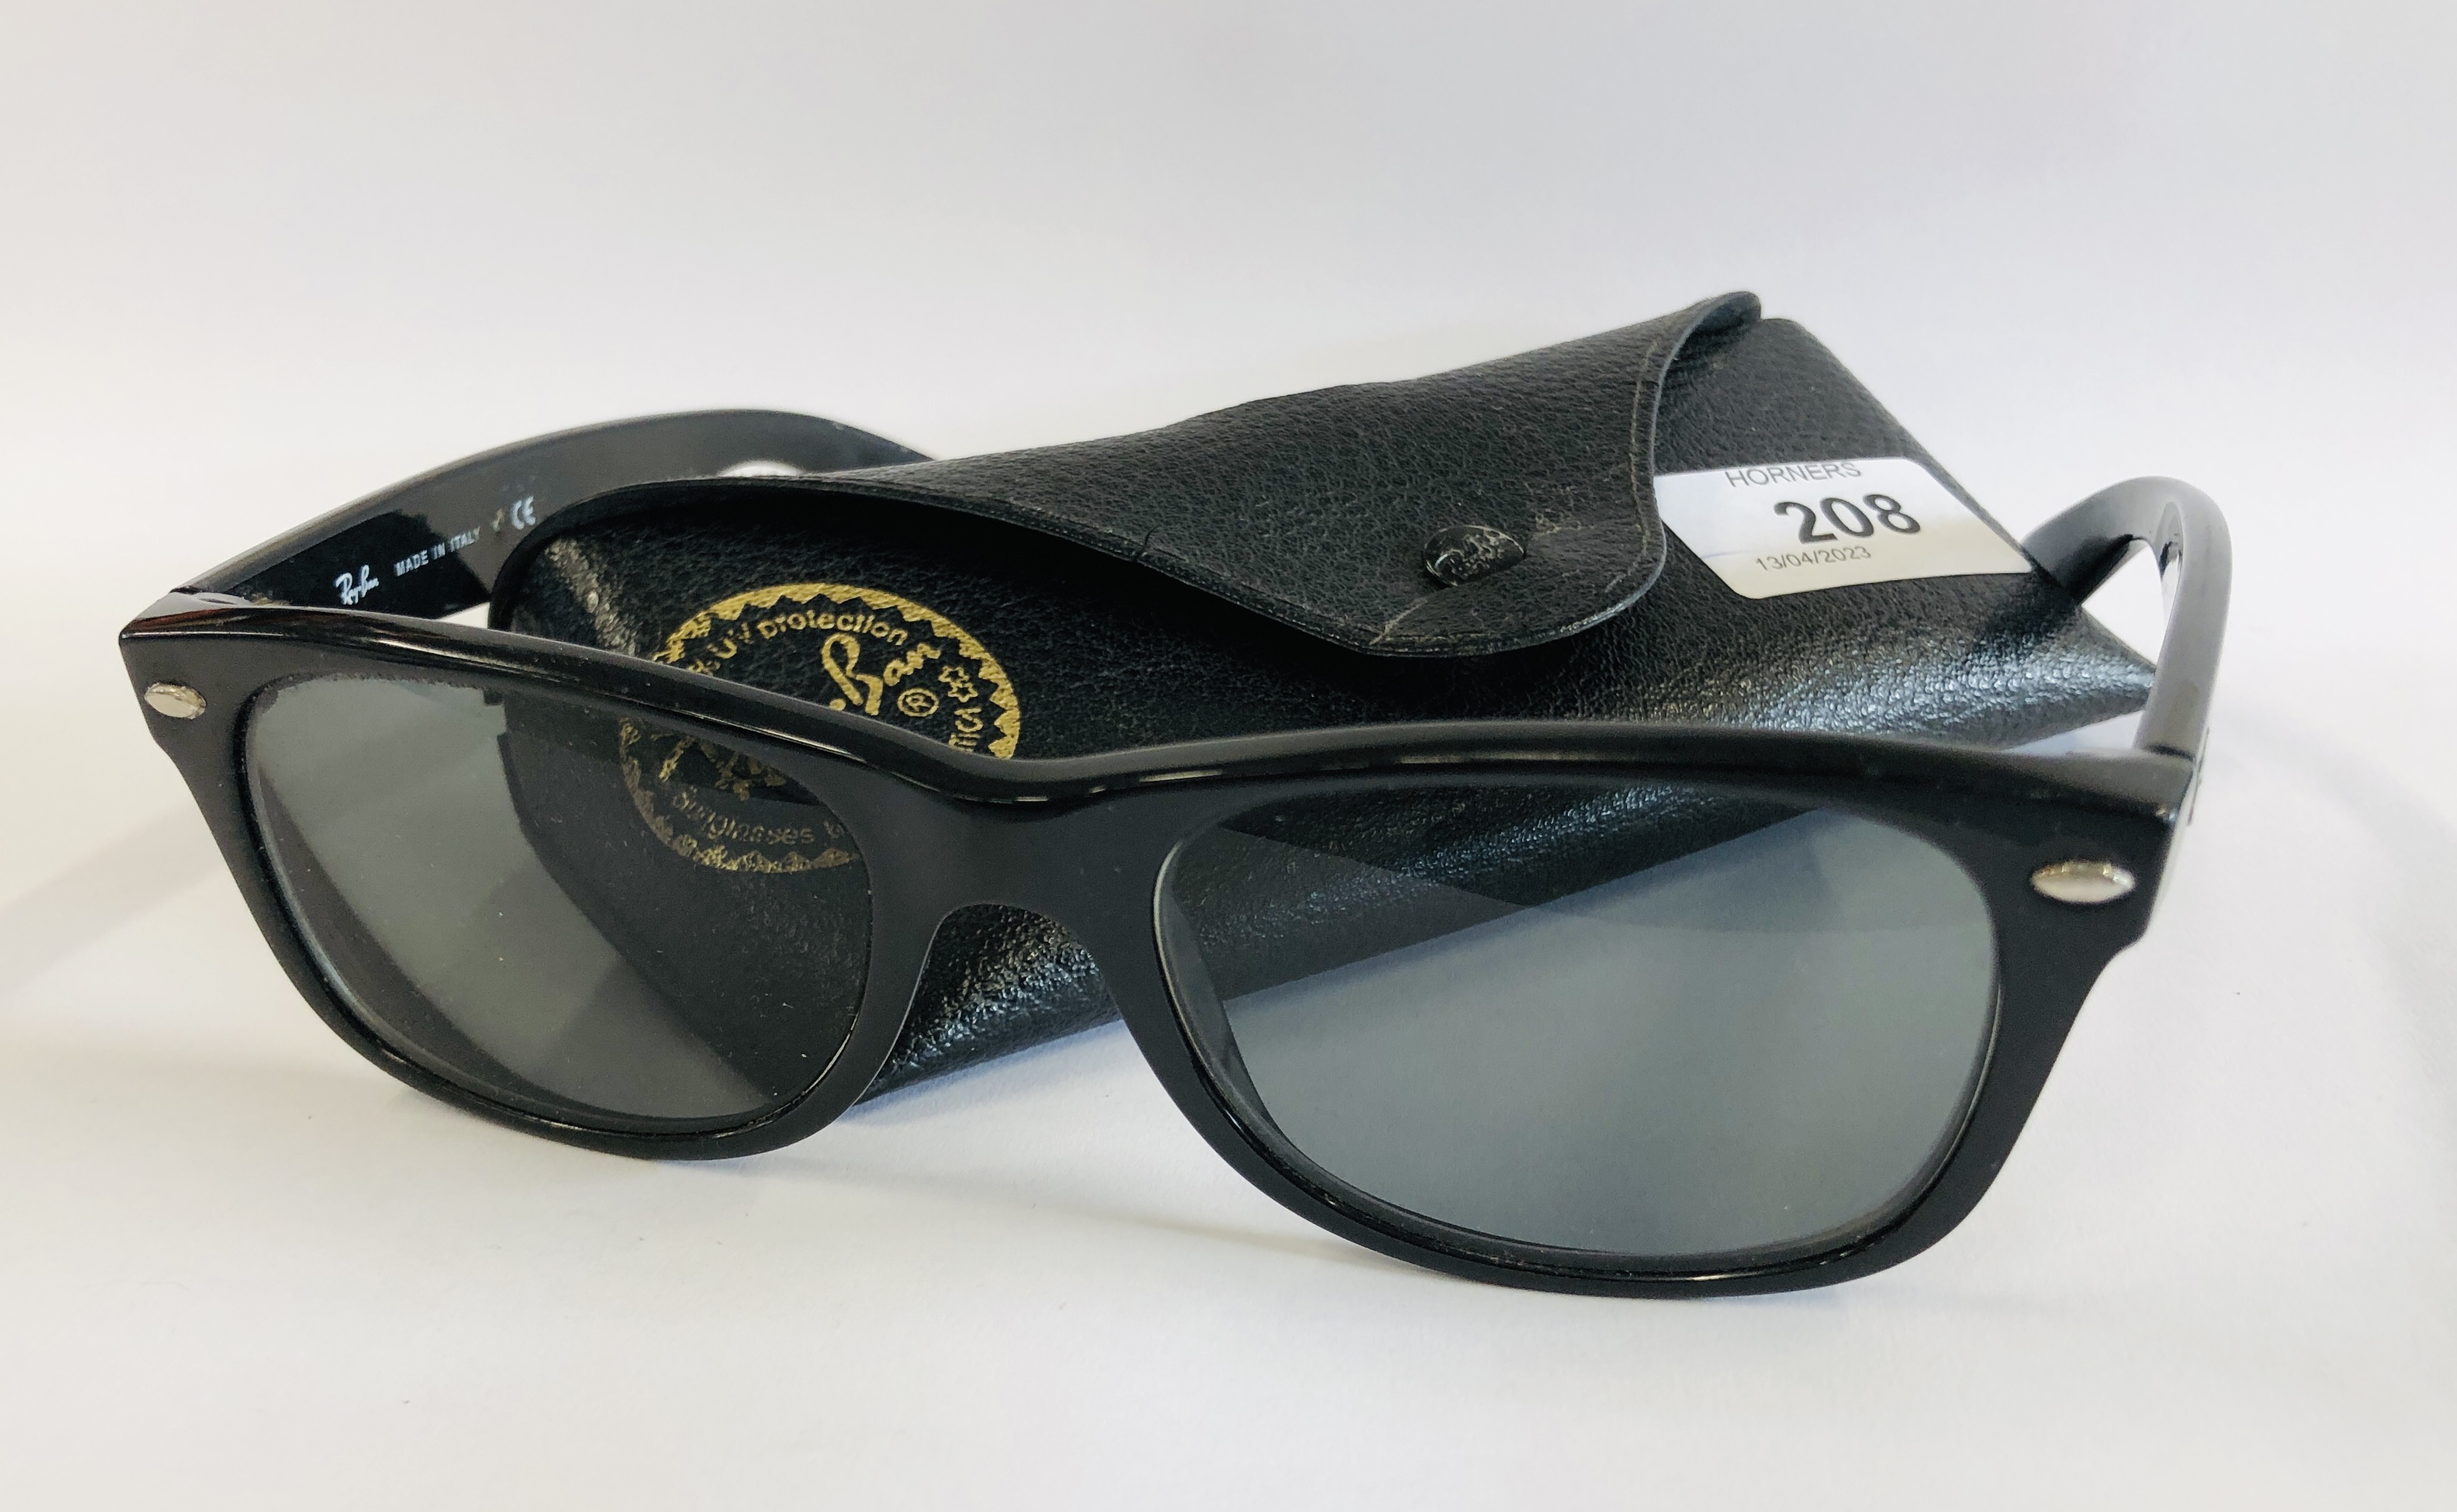 A PAIR OF PRESCRIPTION SUNGLASSES MARKED RAY-BAN RB2132 WITH CASE - Image 2 of 7